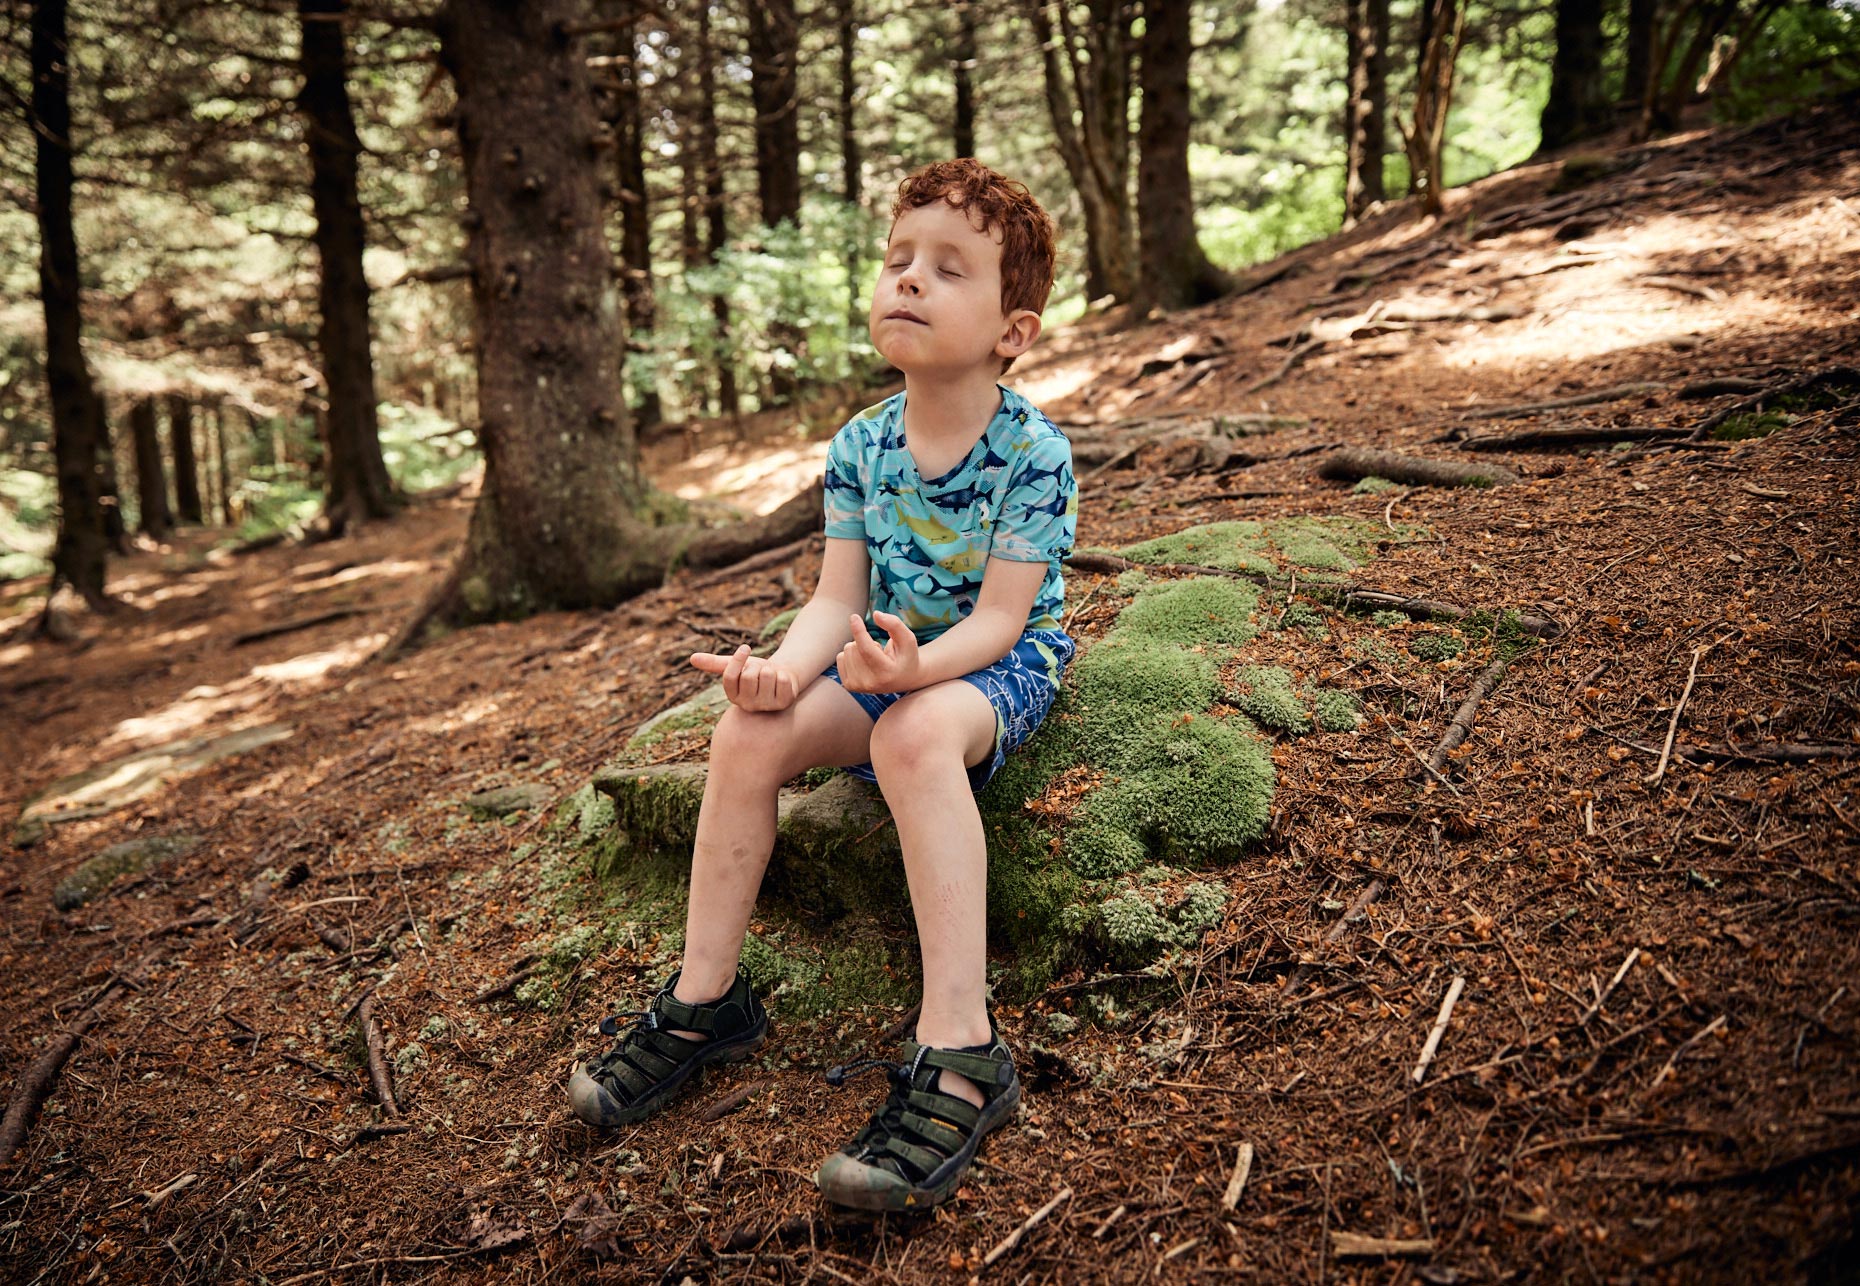 Boy meditating in the woods | Childrens photography by Saverio Truglia